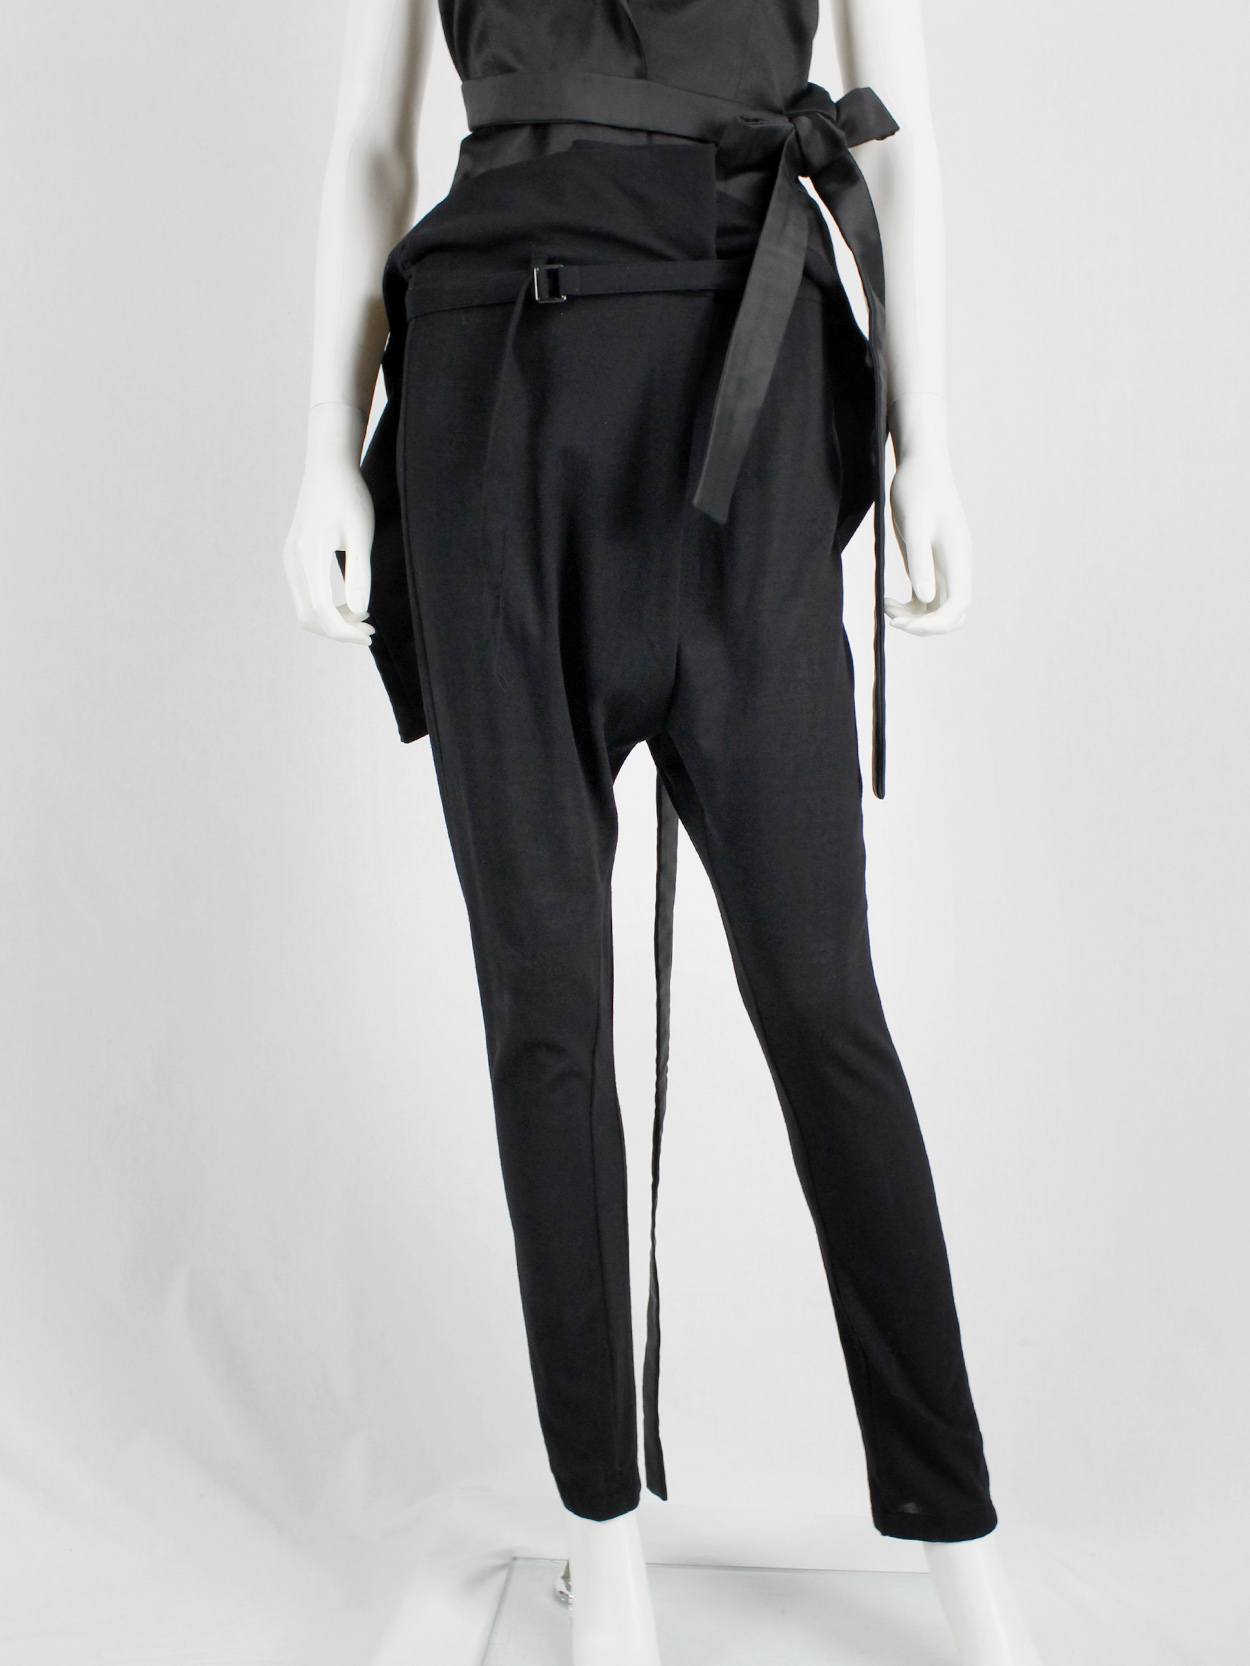 vaniitas Ann Demeulemeester black harem trousers with blet strap and front pleat (4)